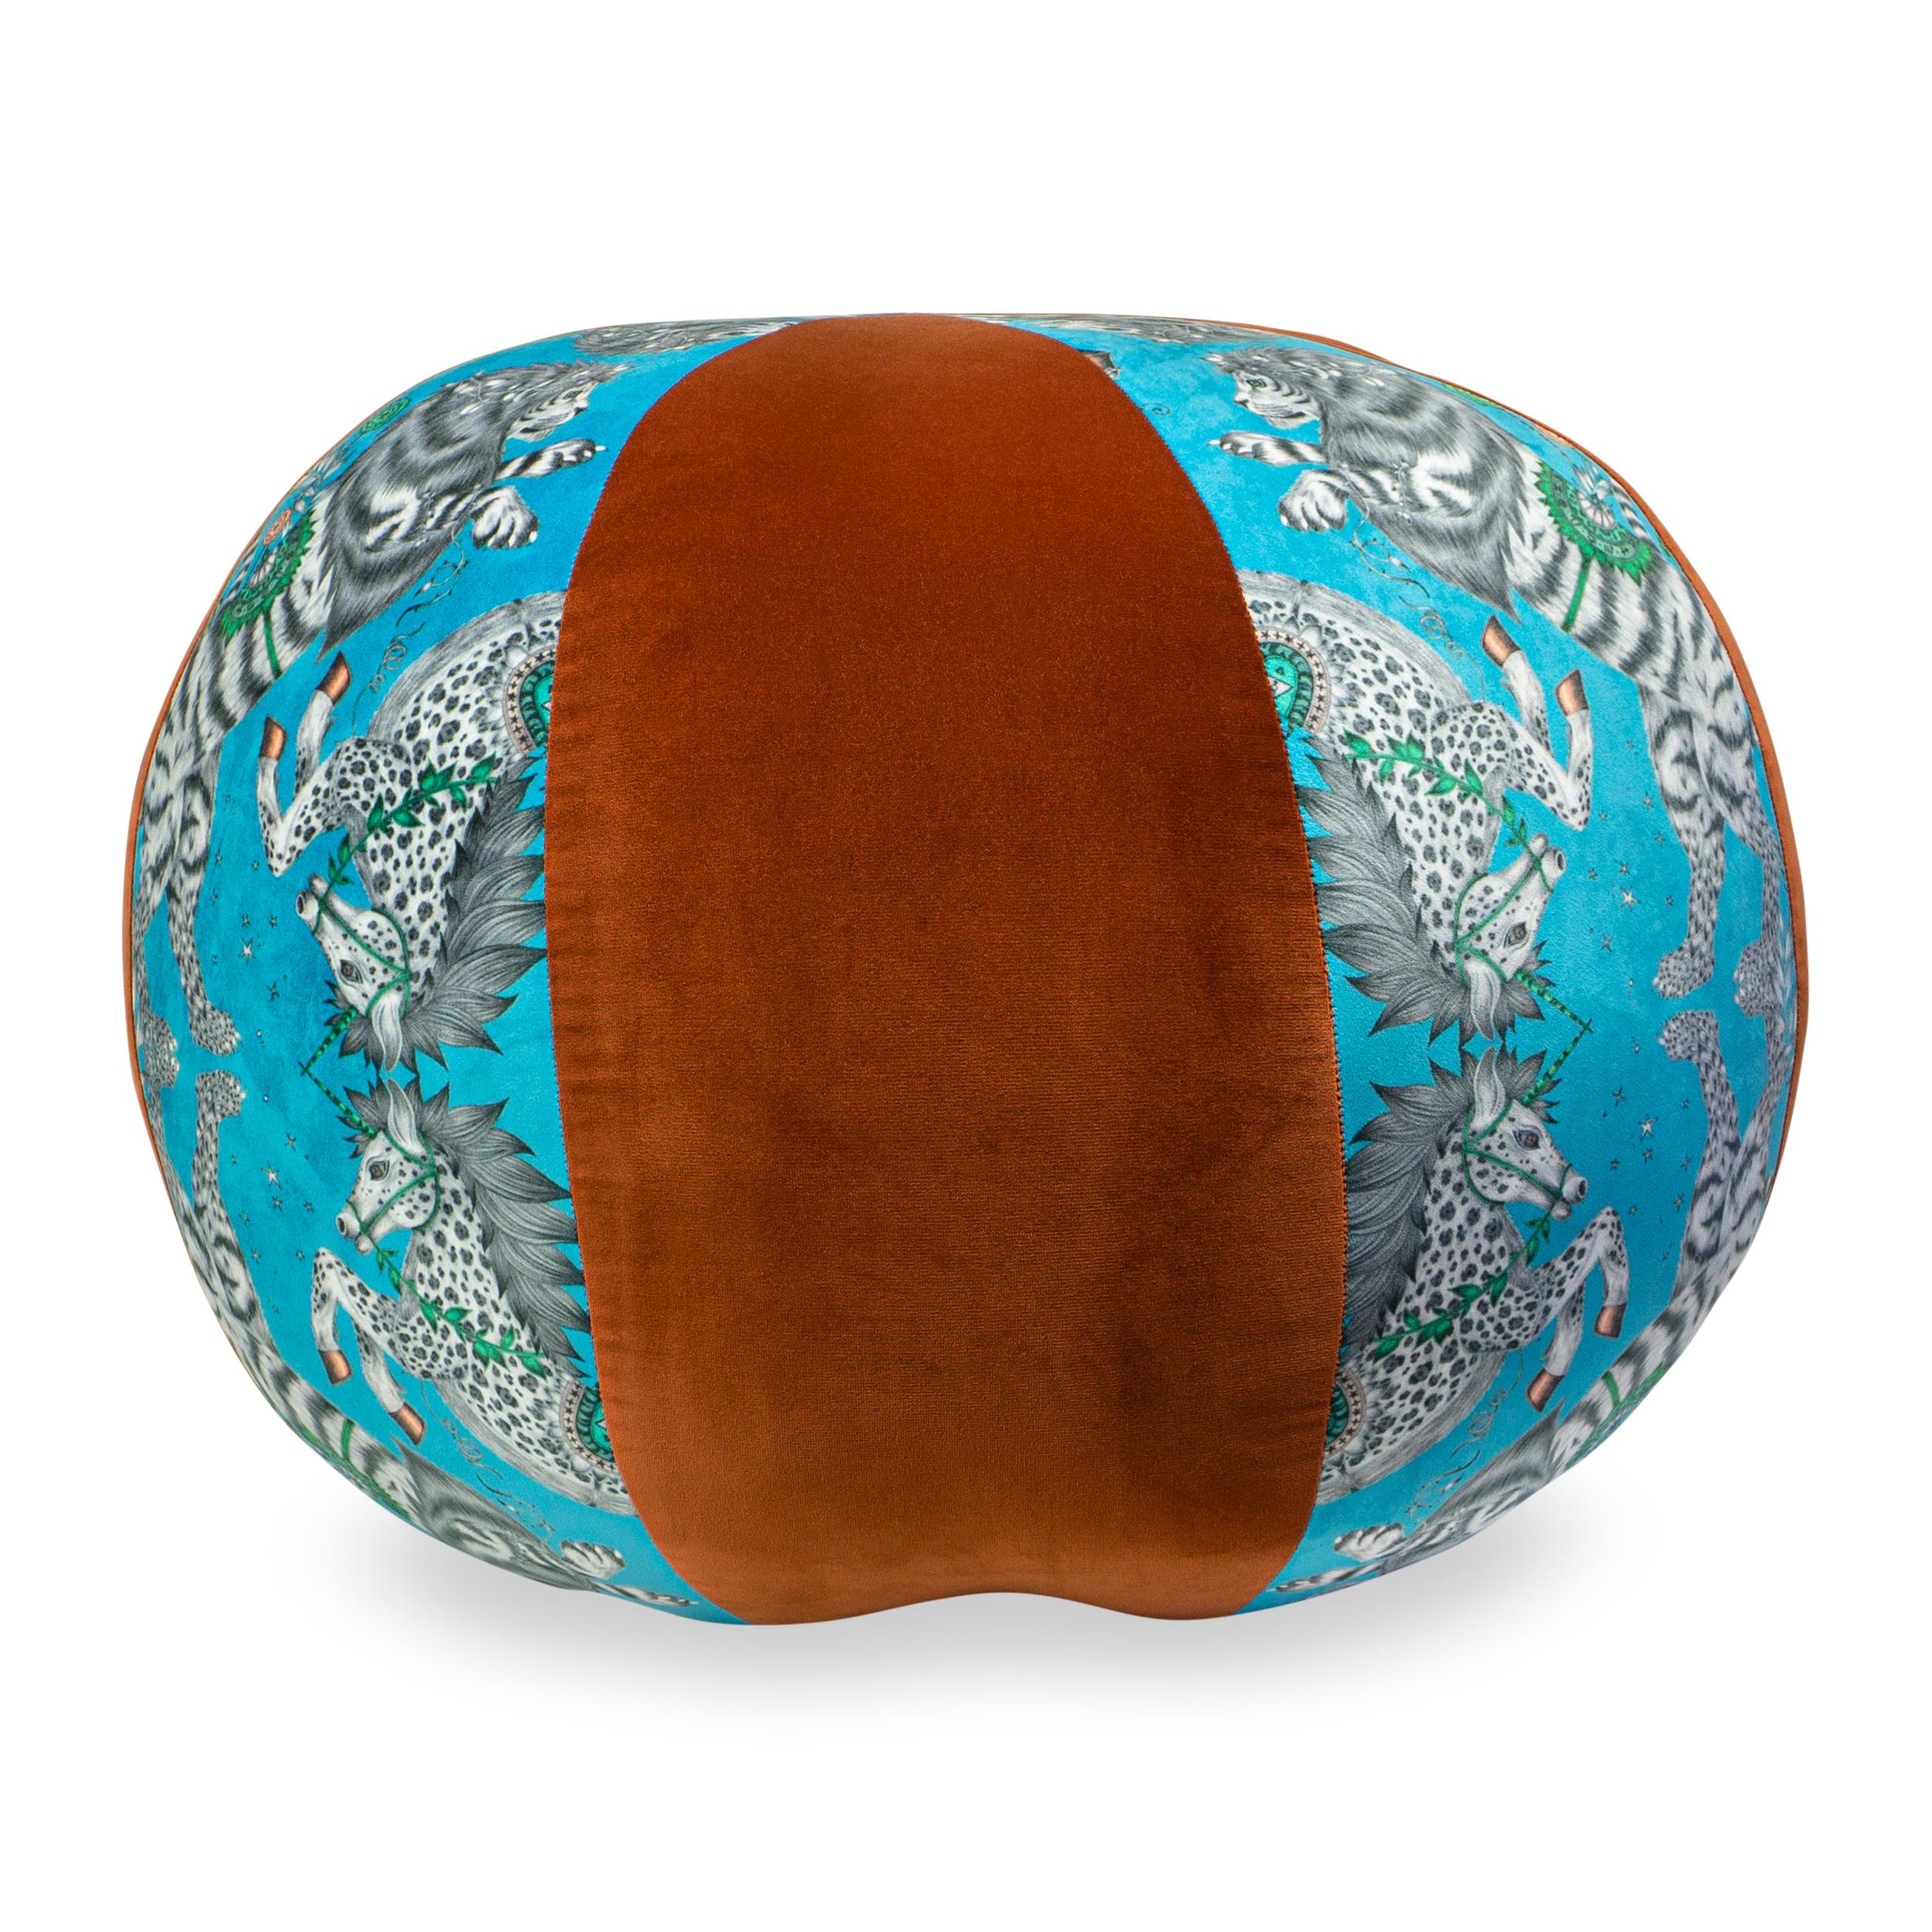 Fantastical Beach Ball Pouf with Emma Shipley Printed Velvet Firm for Sitting In New Condition For Sale In Greenwich, CT